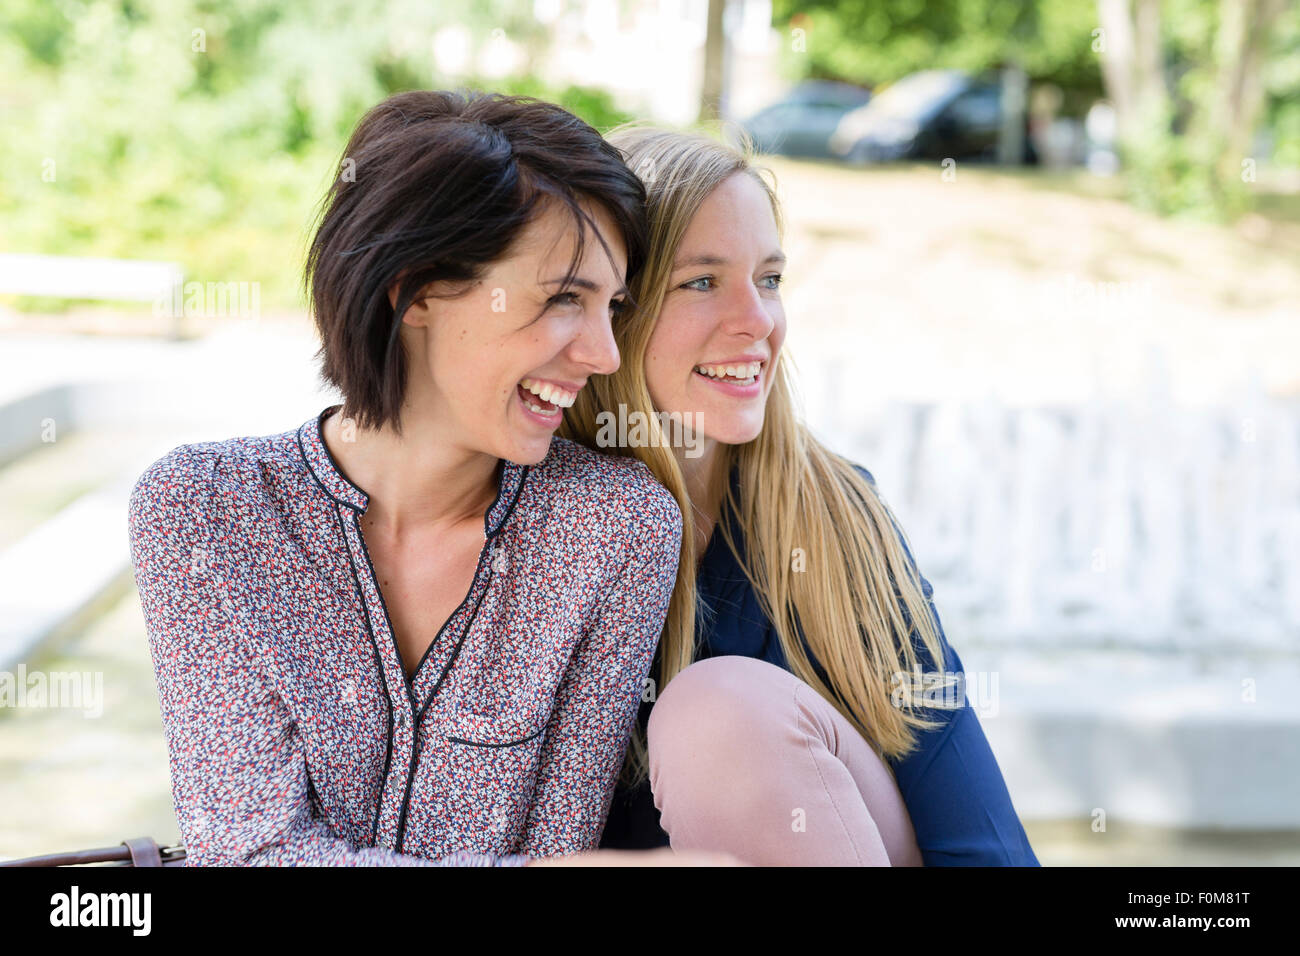 Two girlfriends laugh together and talk Stock Photo